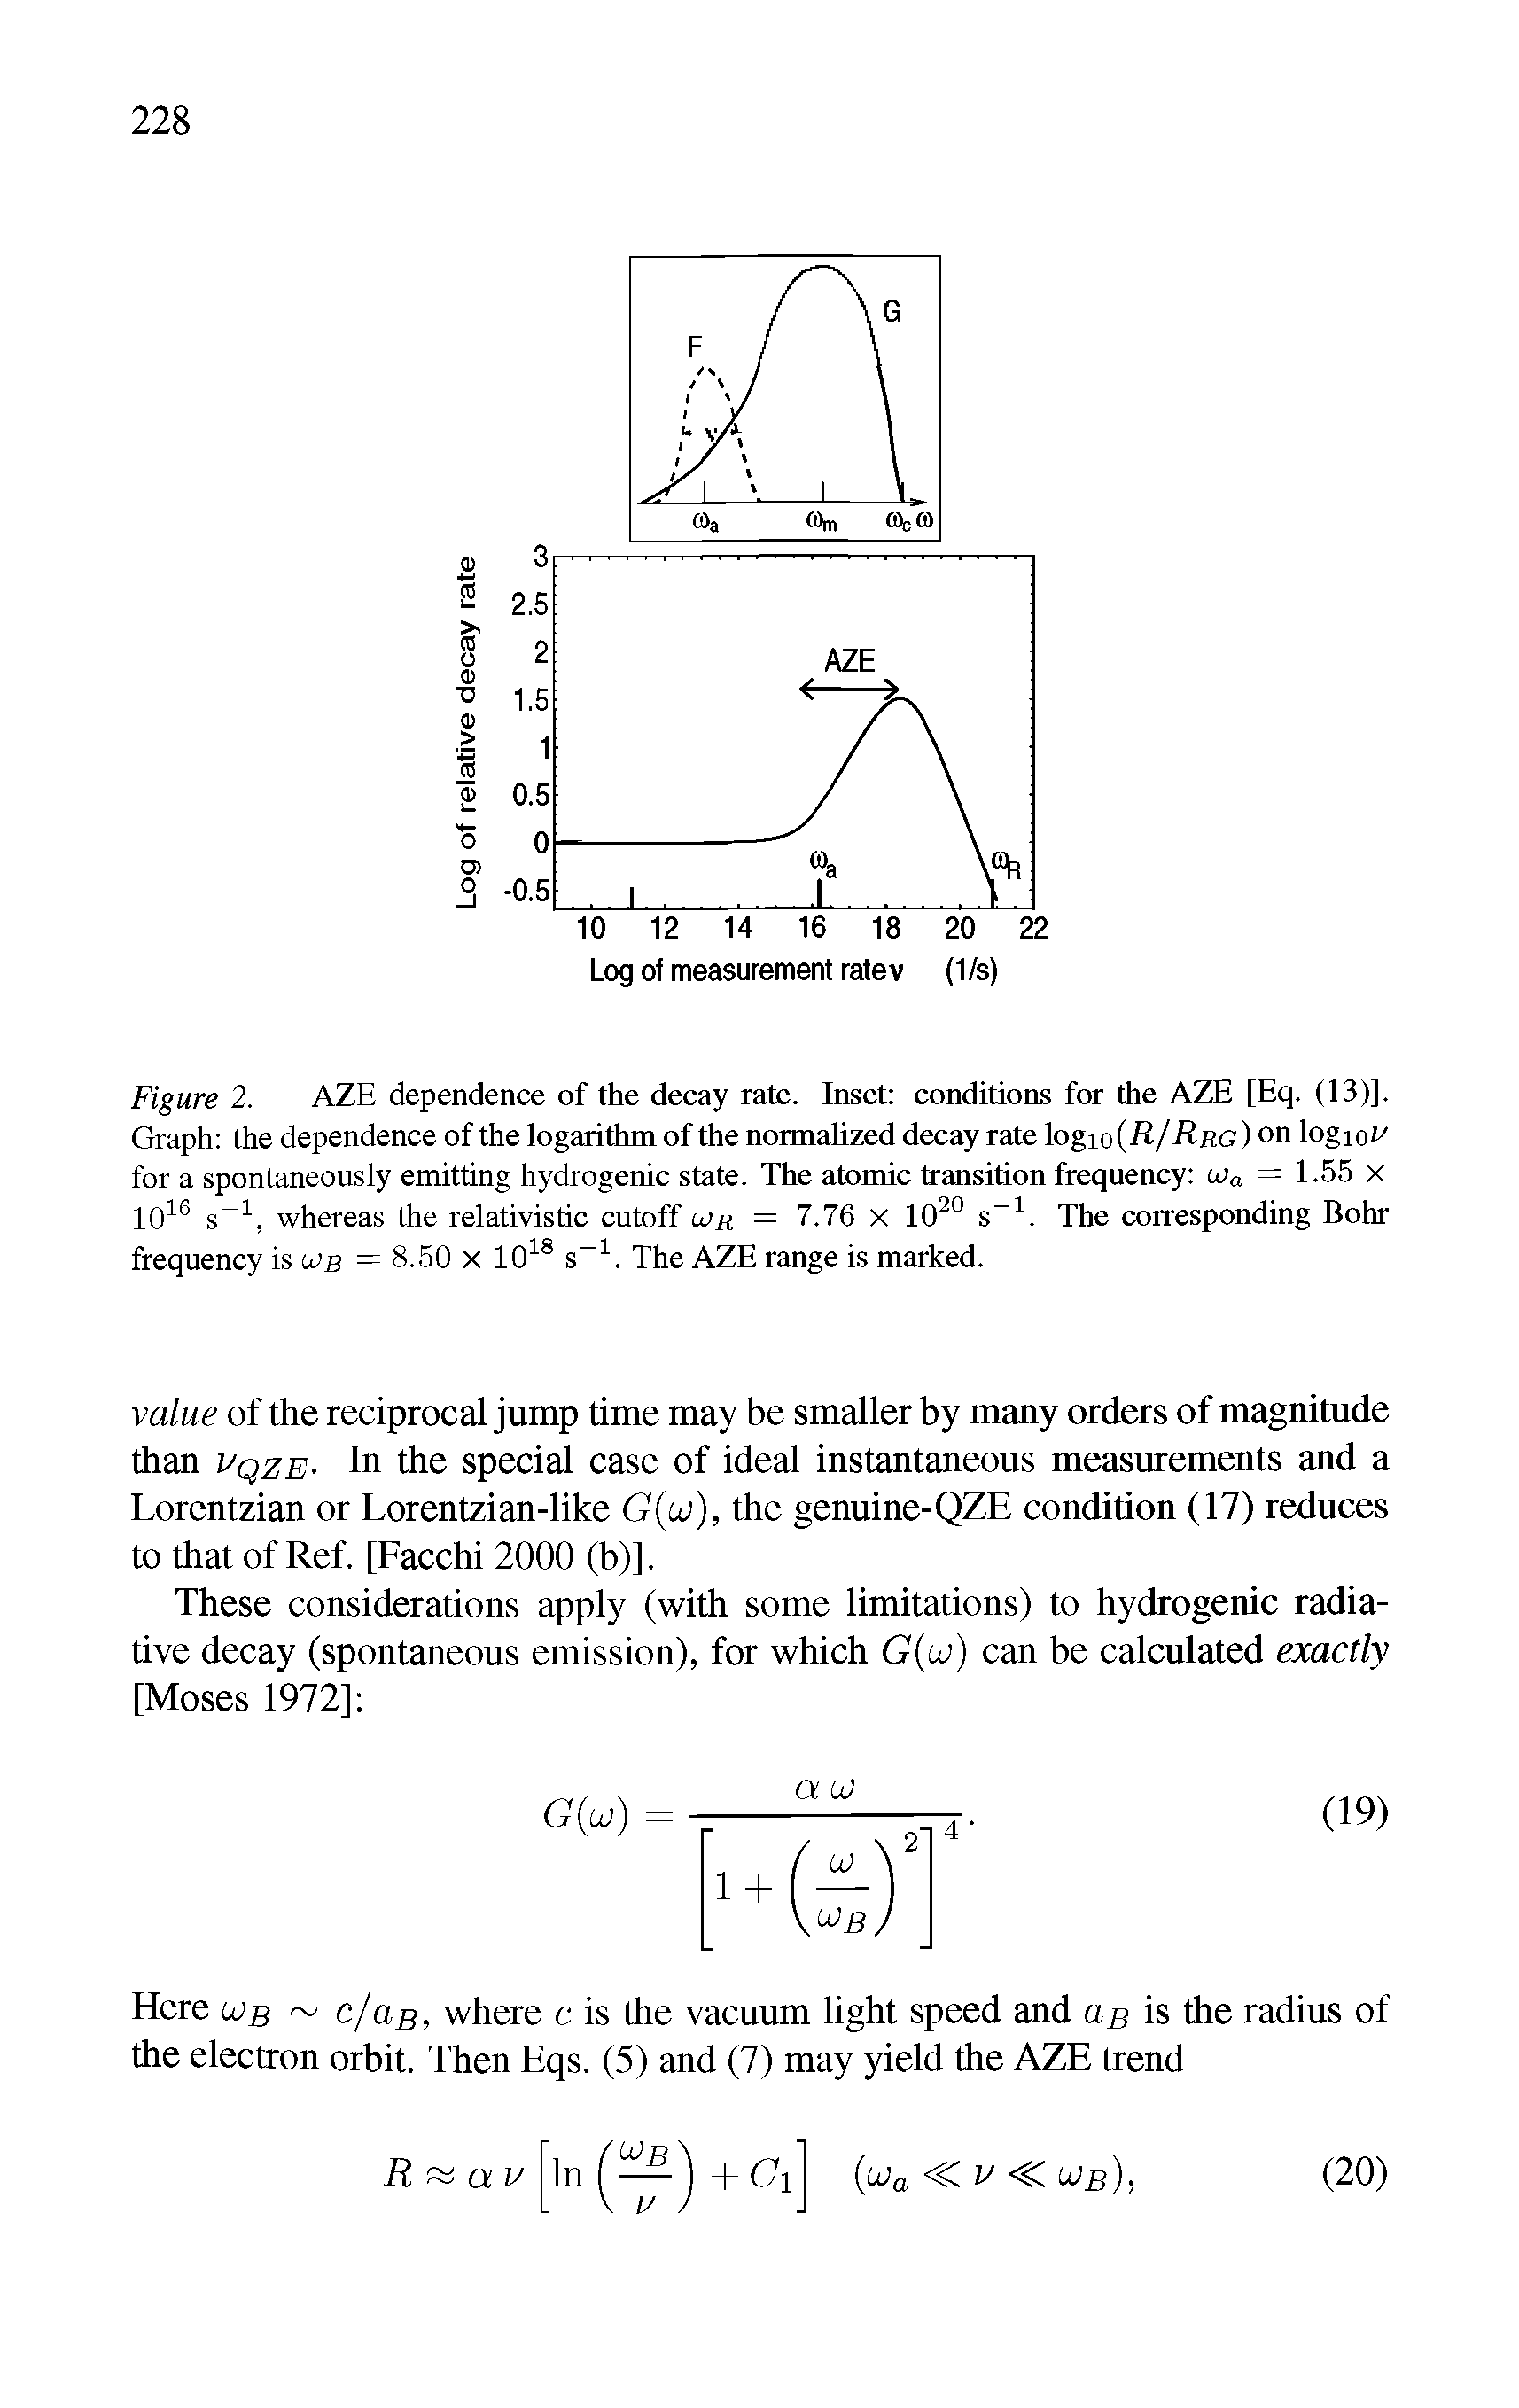 Figure 2. AZE dependence of the decay rate. Inset conditions for the AZE [Eq. (13)]. Graph the dependence of the logarithm of the normalized decay rate logiofh / Rug ) on logioi for a spontaneously emitting hydrogenic state. The atomic transition frequency uJa = 1.55 X 1016 s 1, whereas the relativistic cutoff cor = 7.76 x 1020 s-1. The corresponding Bohr frequency is cub = 8.50 x 1018 s 1. The AZE range is marked.